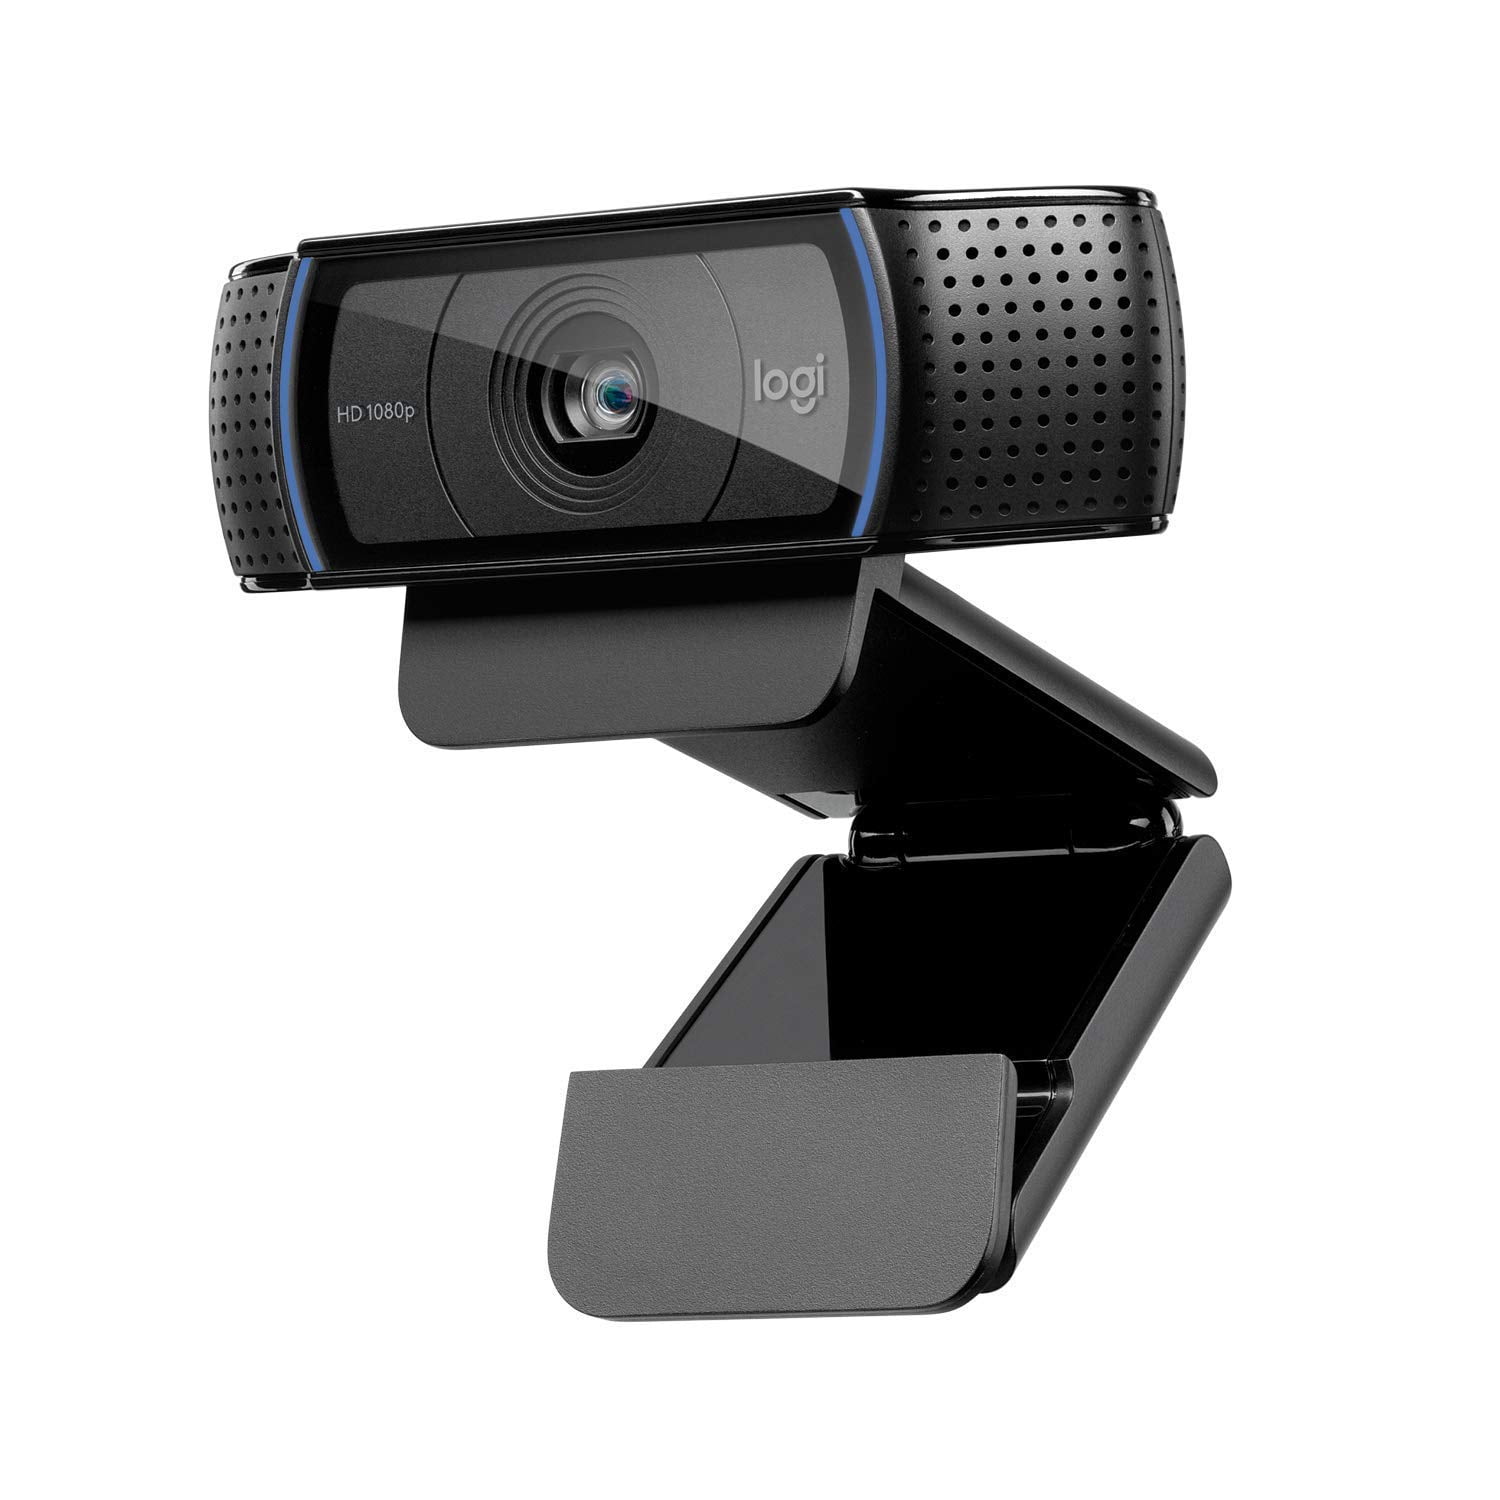 Bodno Full HD 1080p Web Camera with Built-in HD Microphone, Widescreen